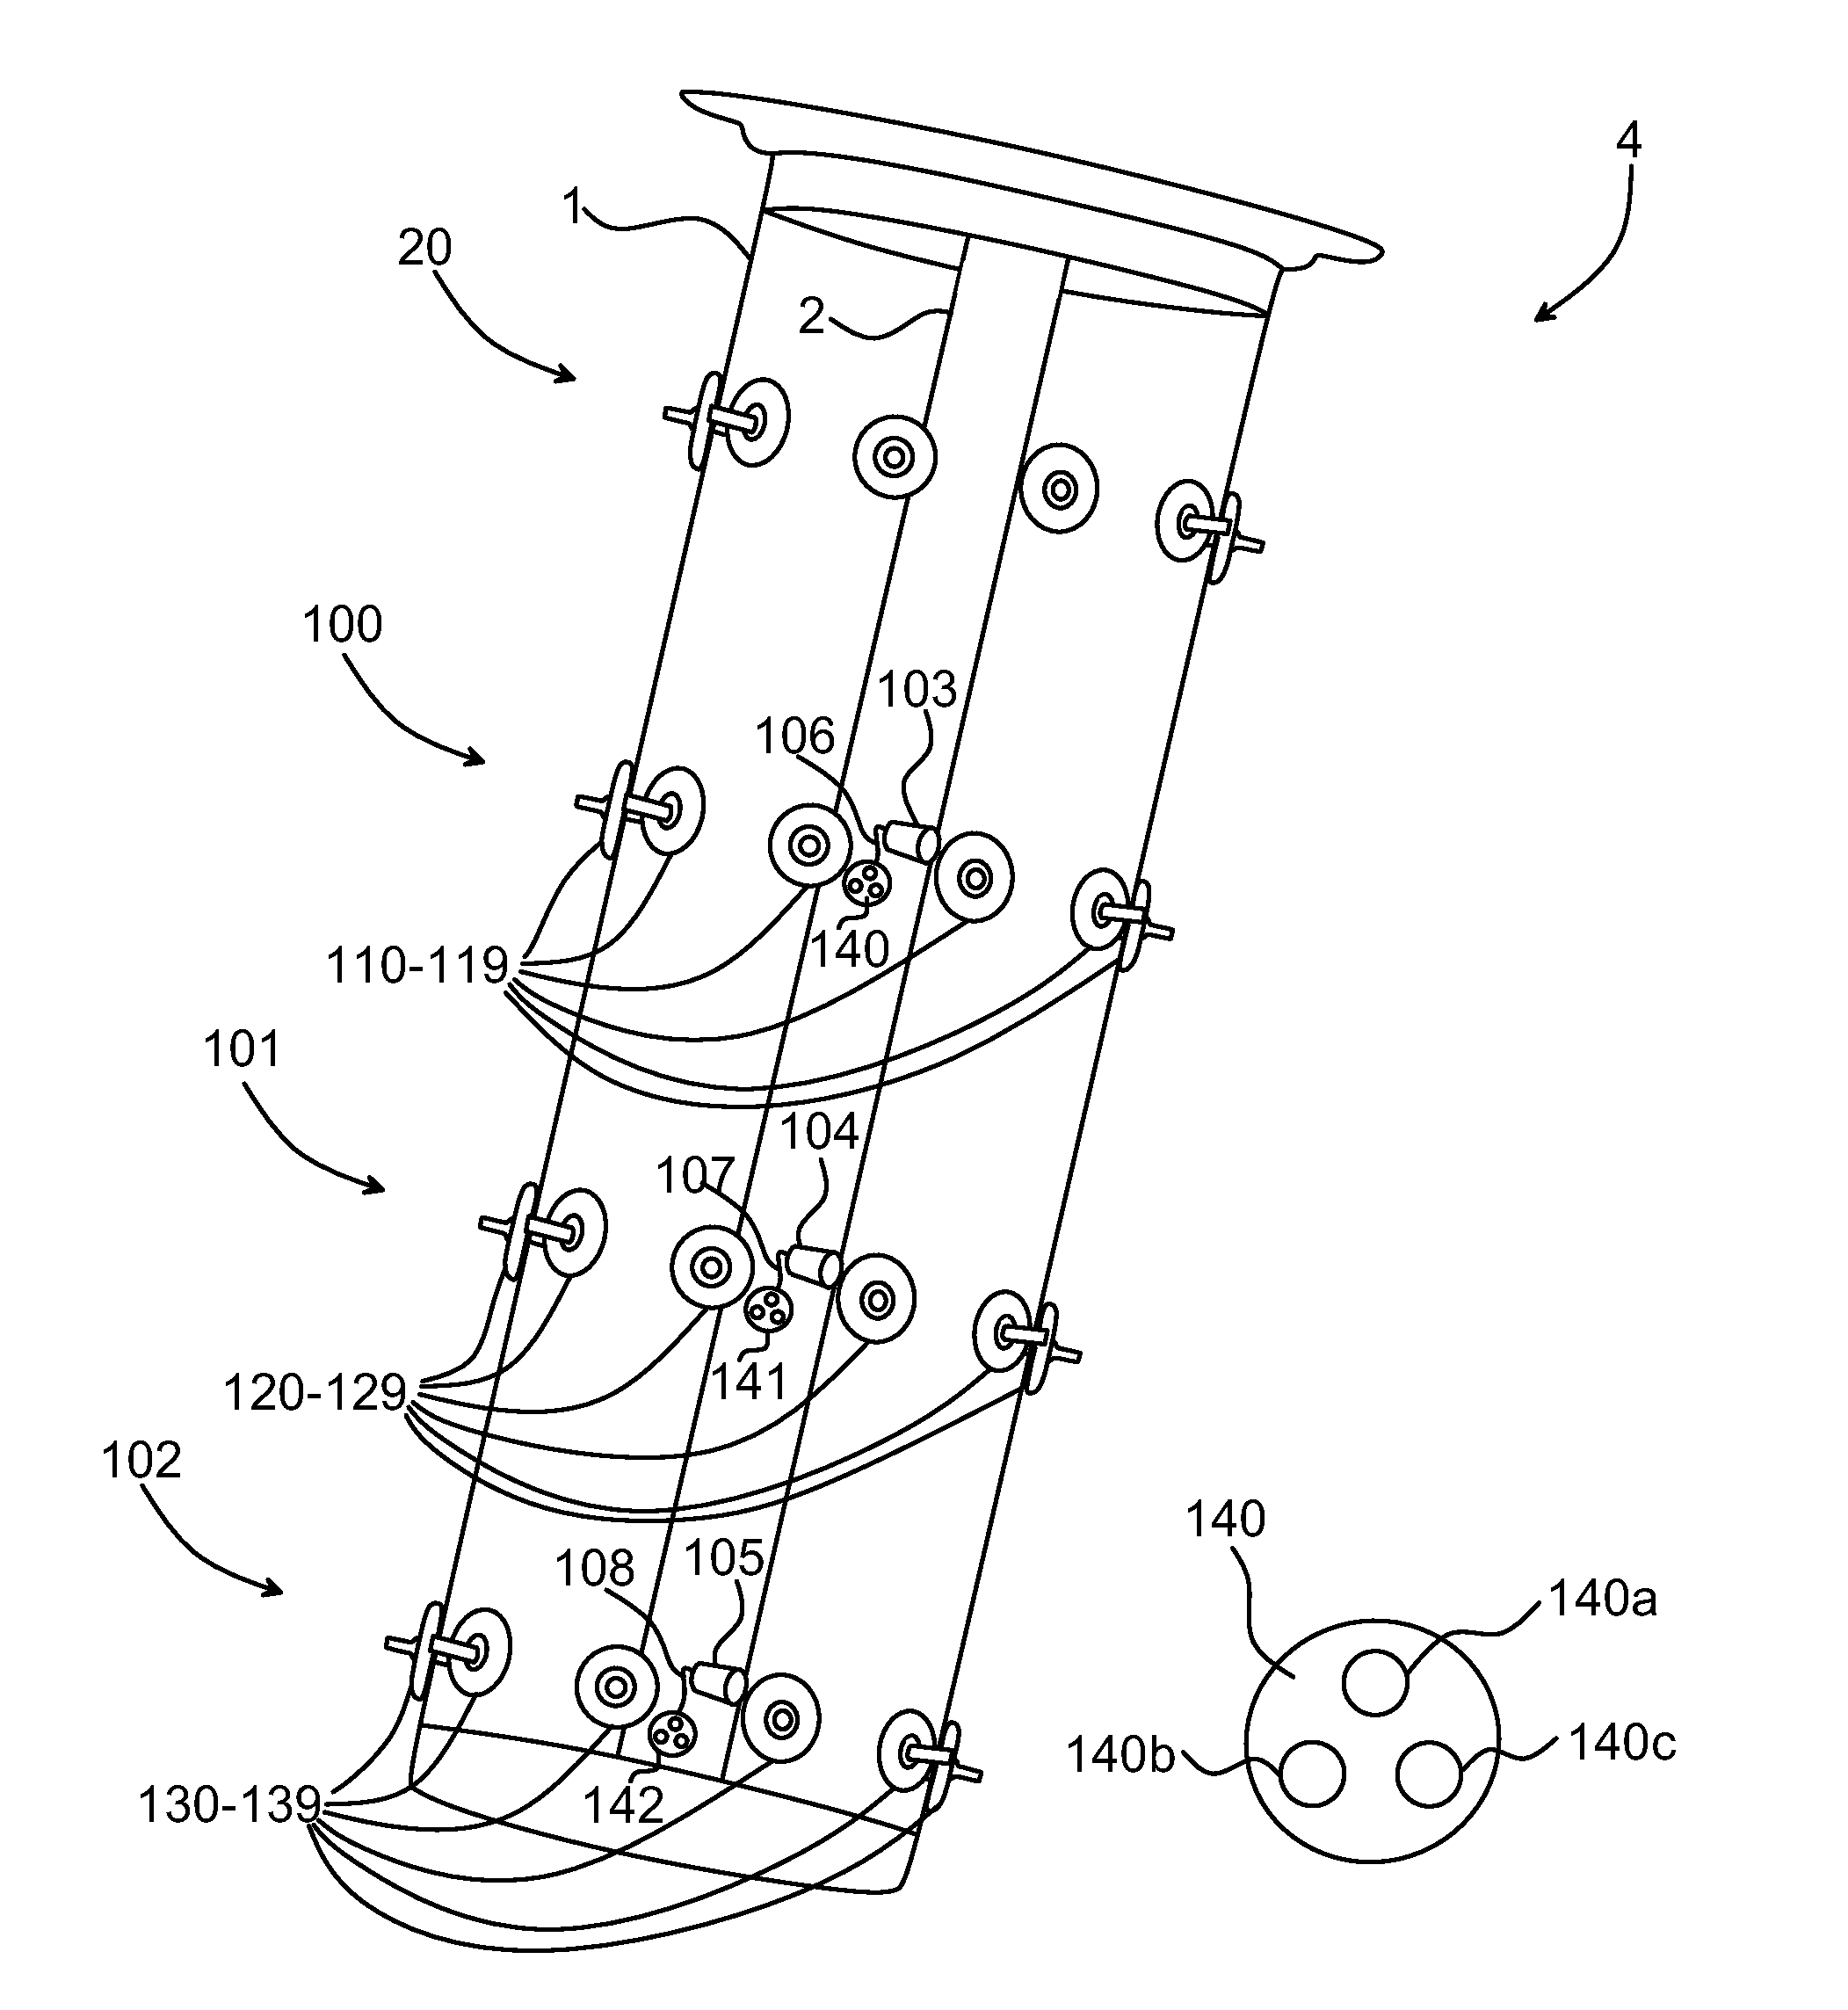 Measuring Contact Sequence In A Tap Changer